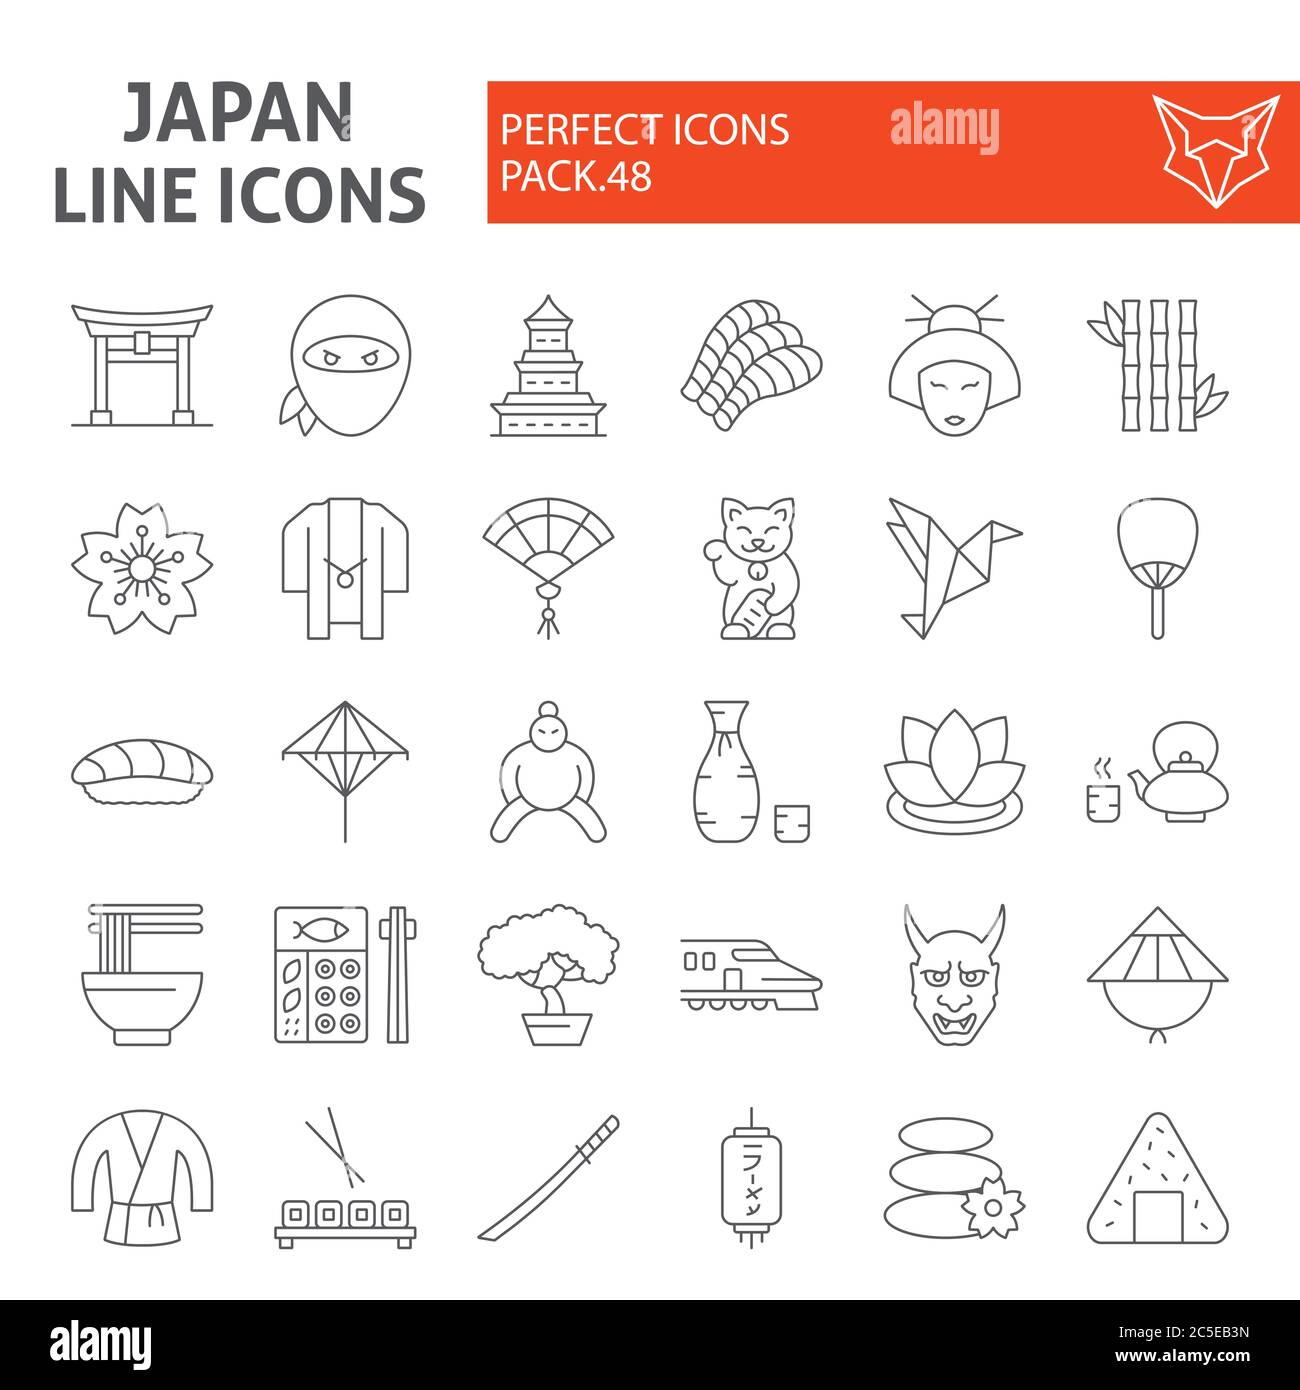 Japan thin line icon set, japanese food symbols collection, vector sketches, logo illustrations, asian culture signs linear pictograms package Stock Vector